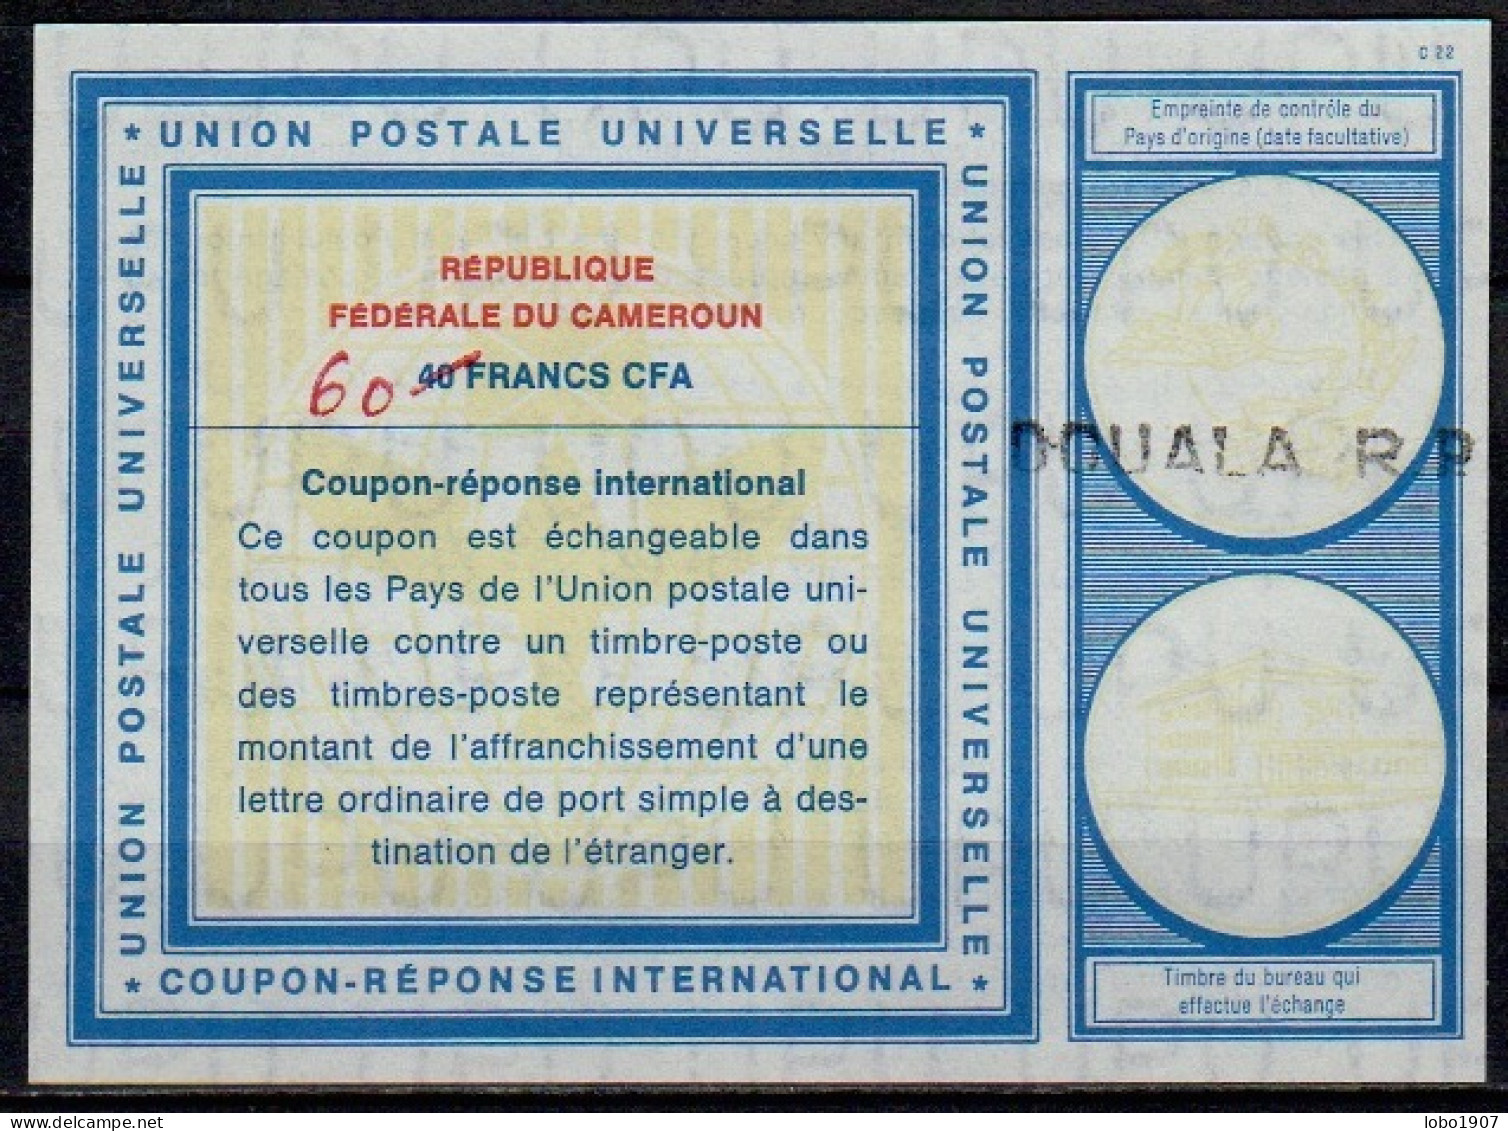 CAMEROUN, CAMEROON  Vi19  60 / 40 FRANCS Int. Reply Coupon Reponse Antwortschein IRC IAS Cupon Respuesta  DOUALA  R.P. - Cameroon (1960-...)